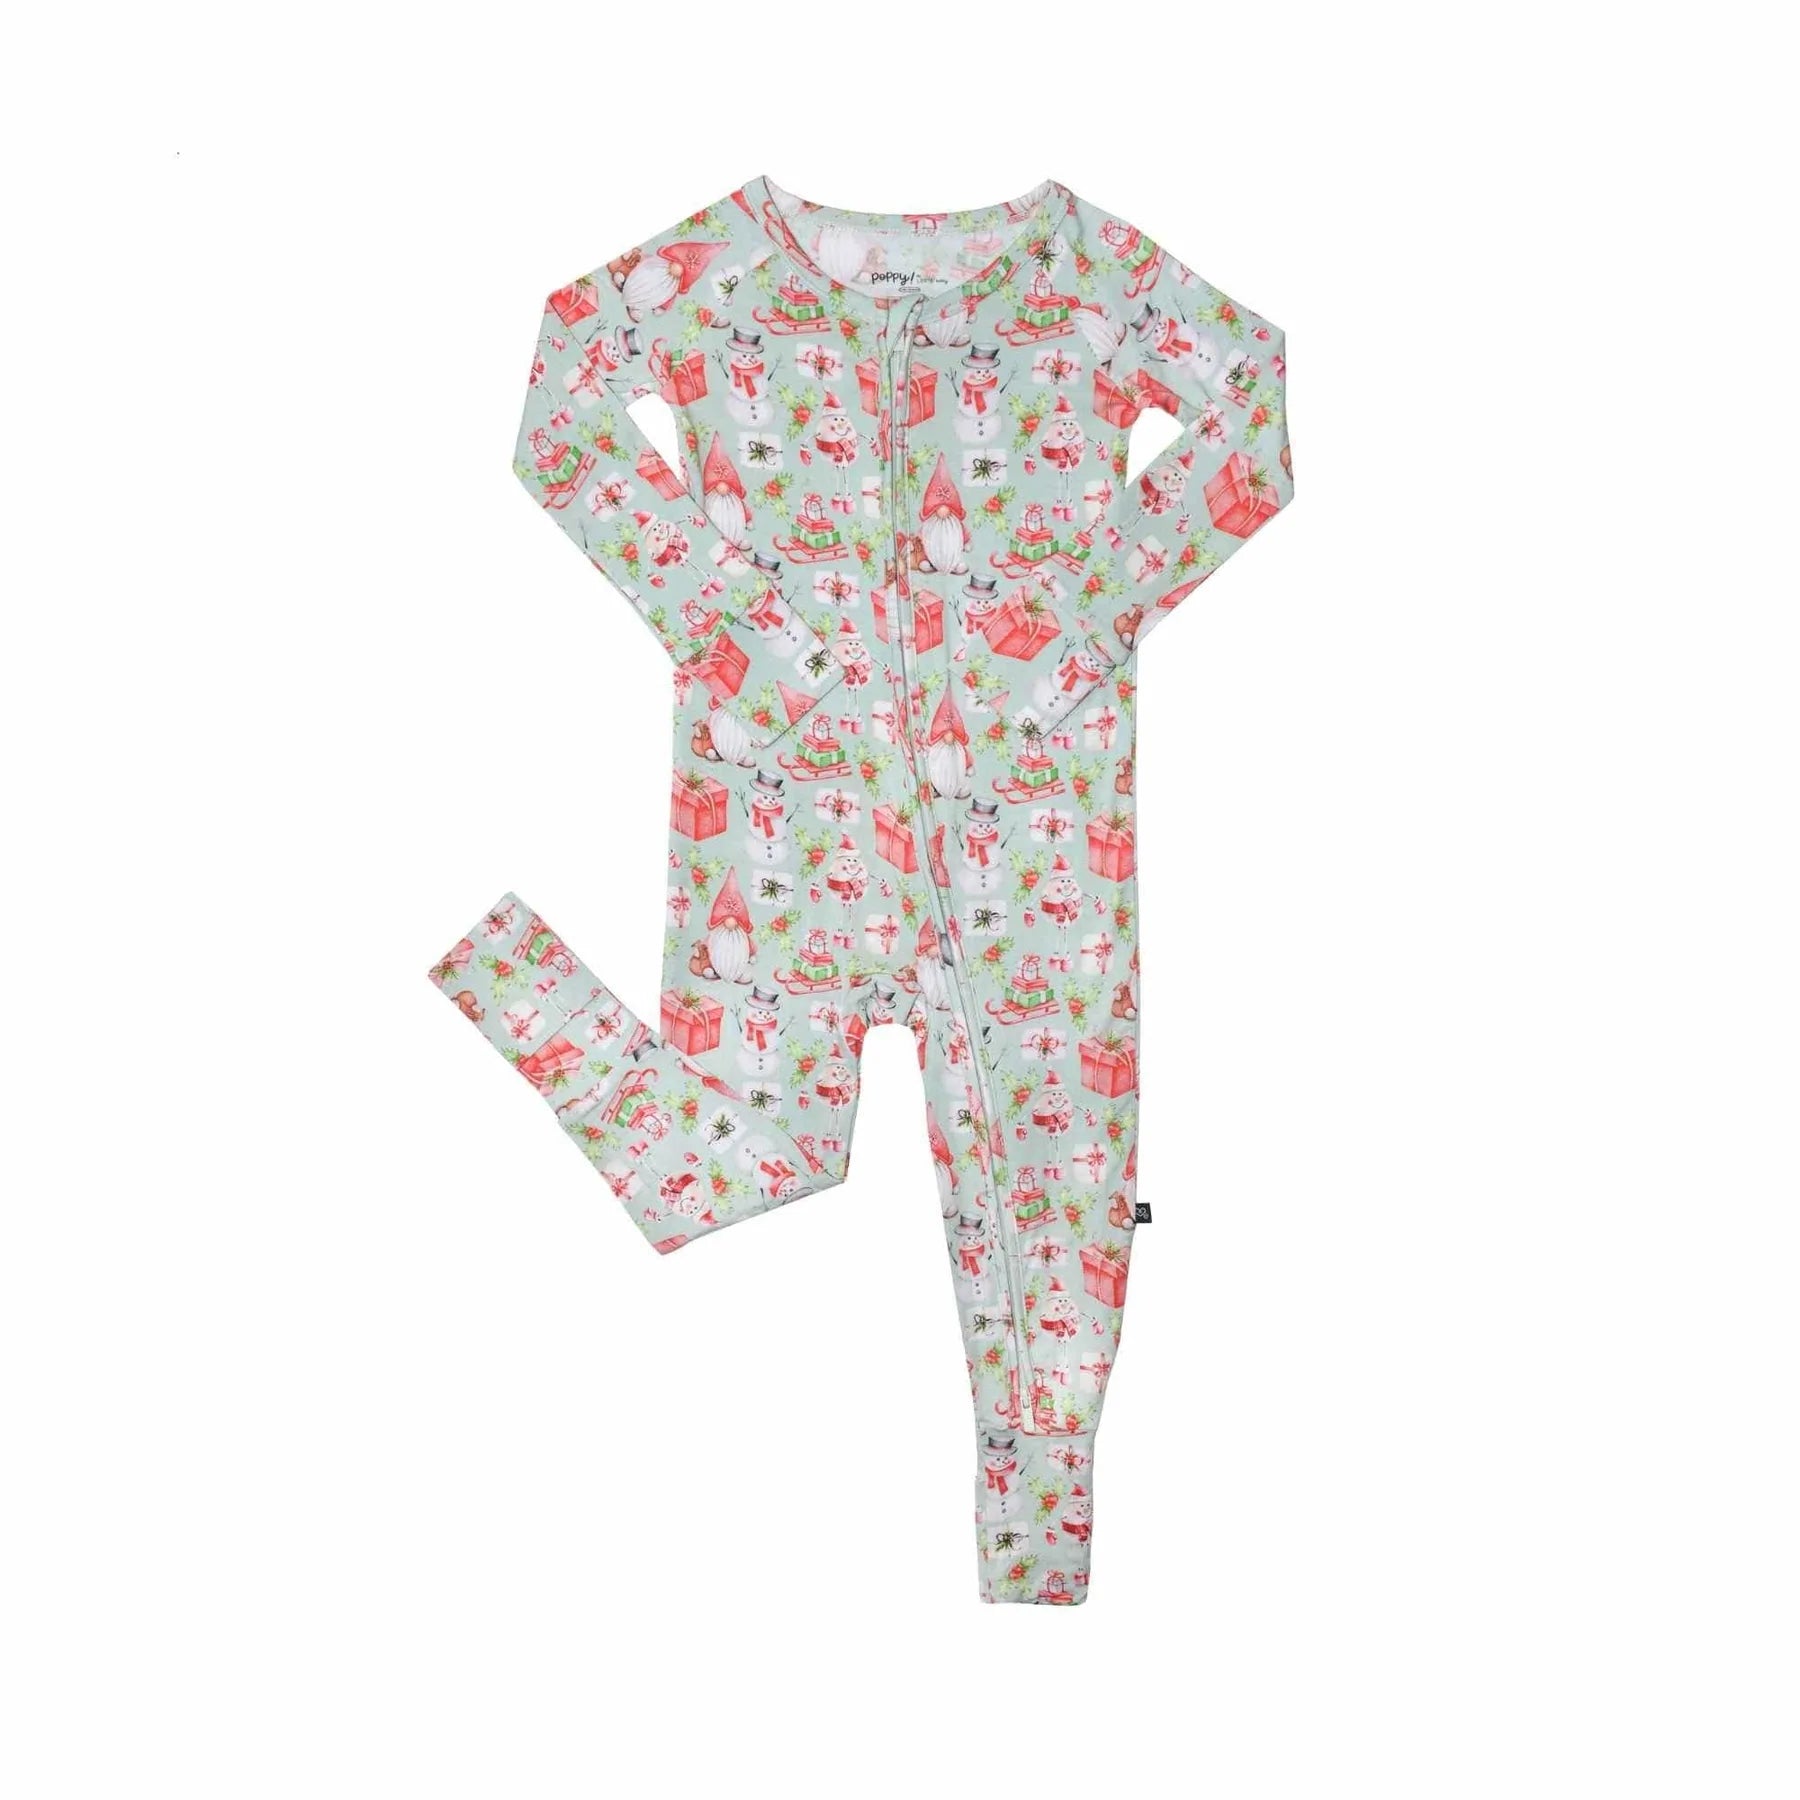 Silas 'Poppy': The Convertible Romper